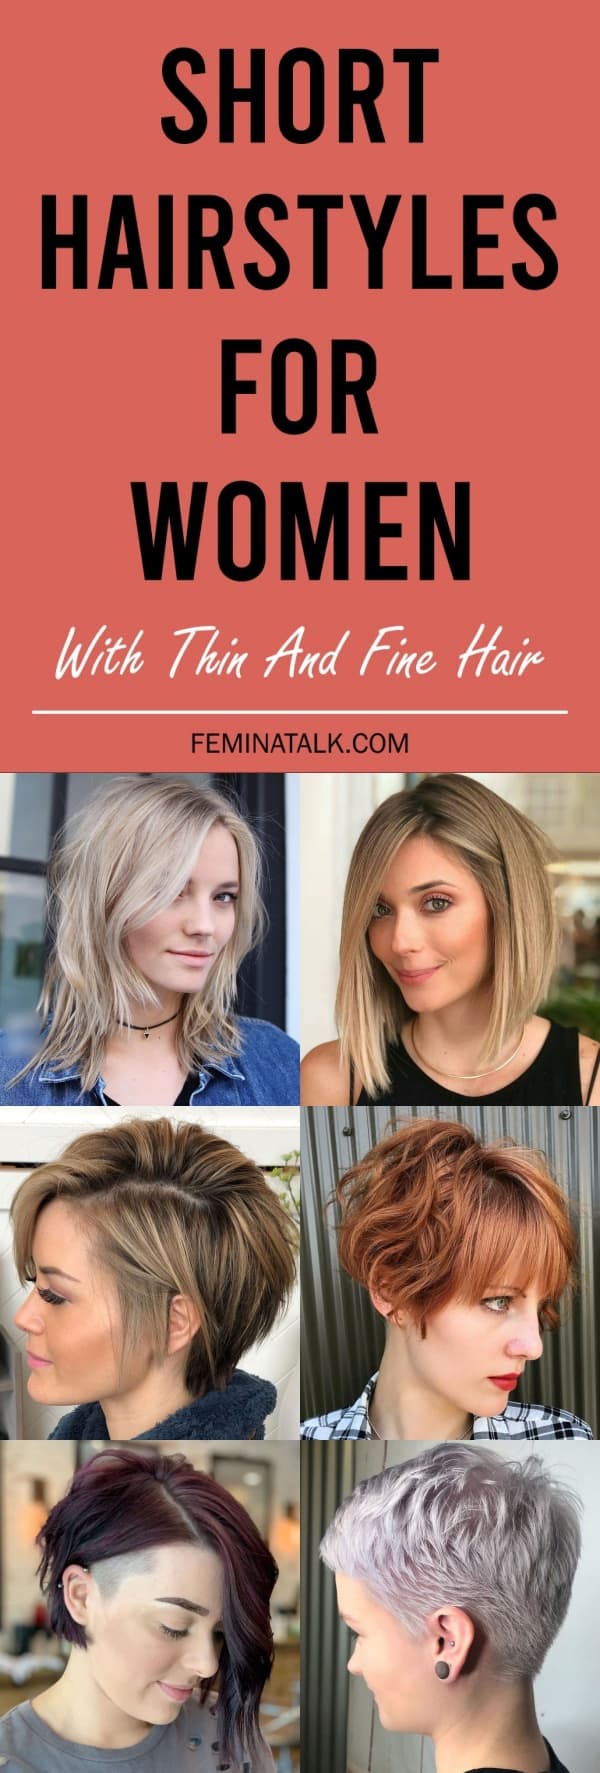 Short Hairstyles For Women With Thin And Fine Hair